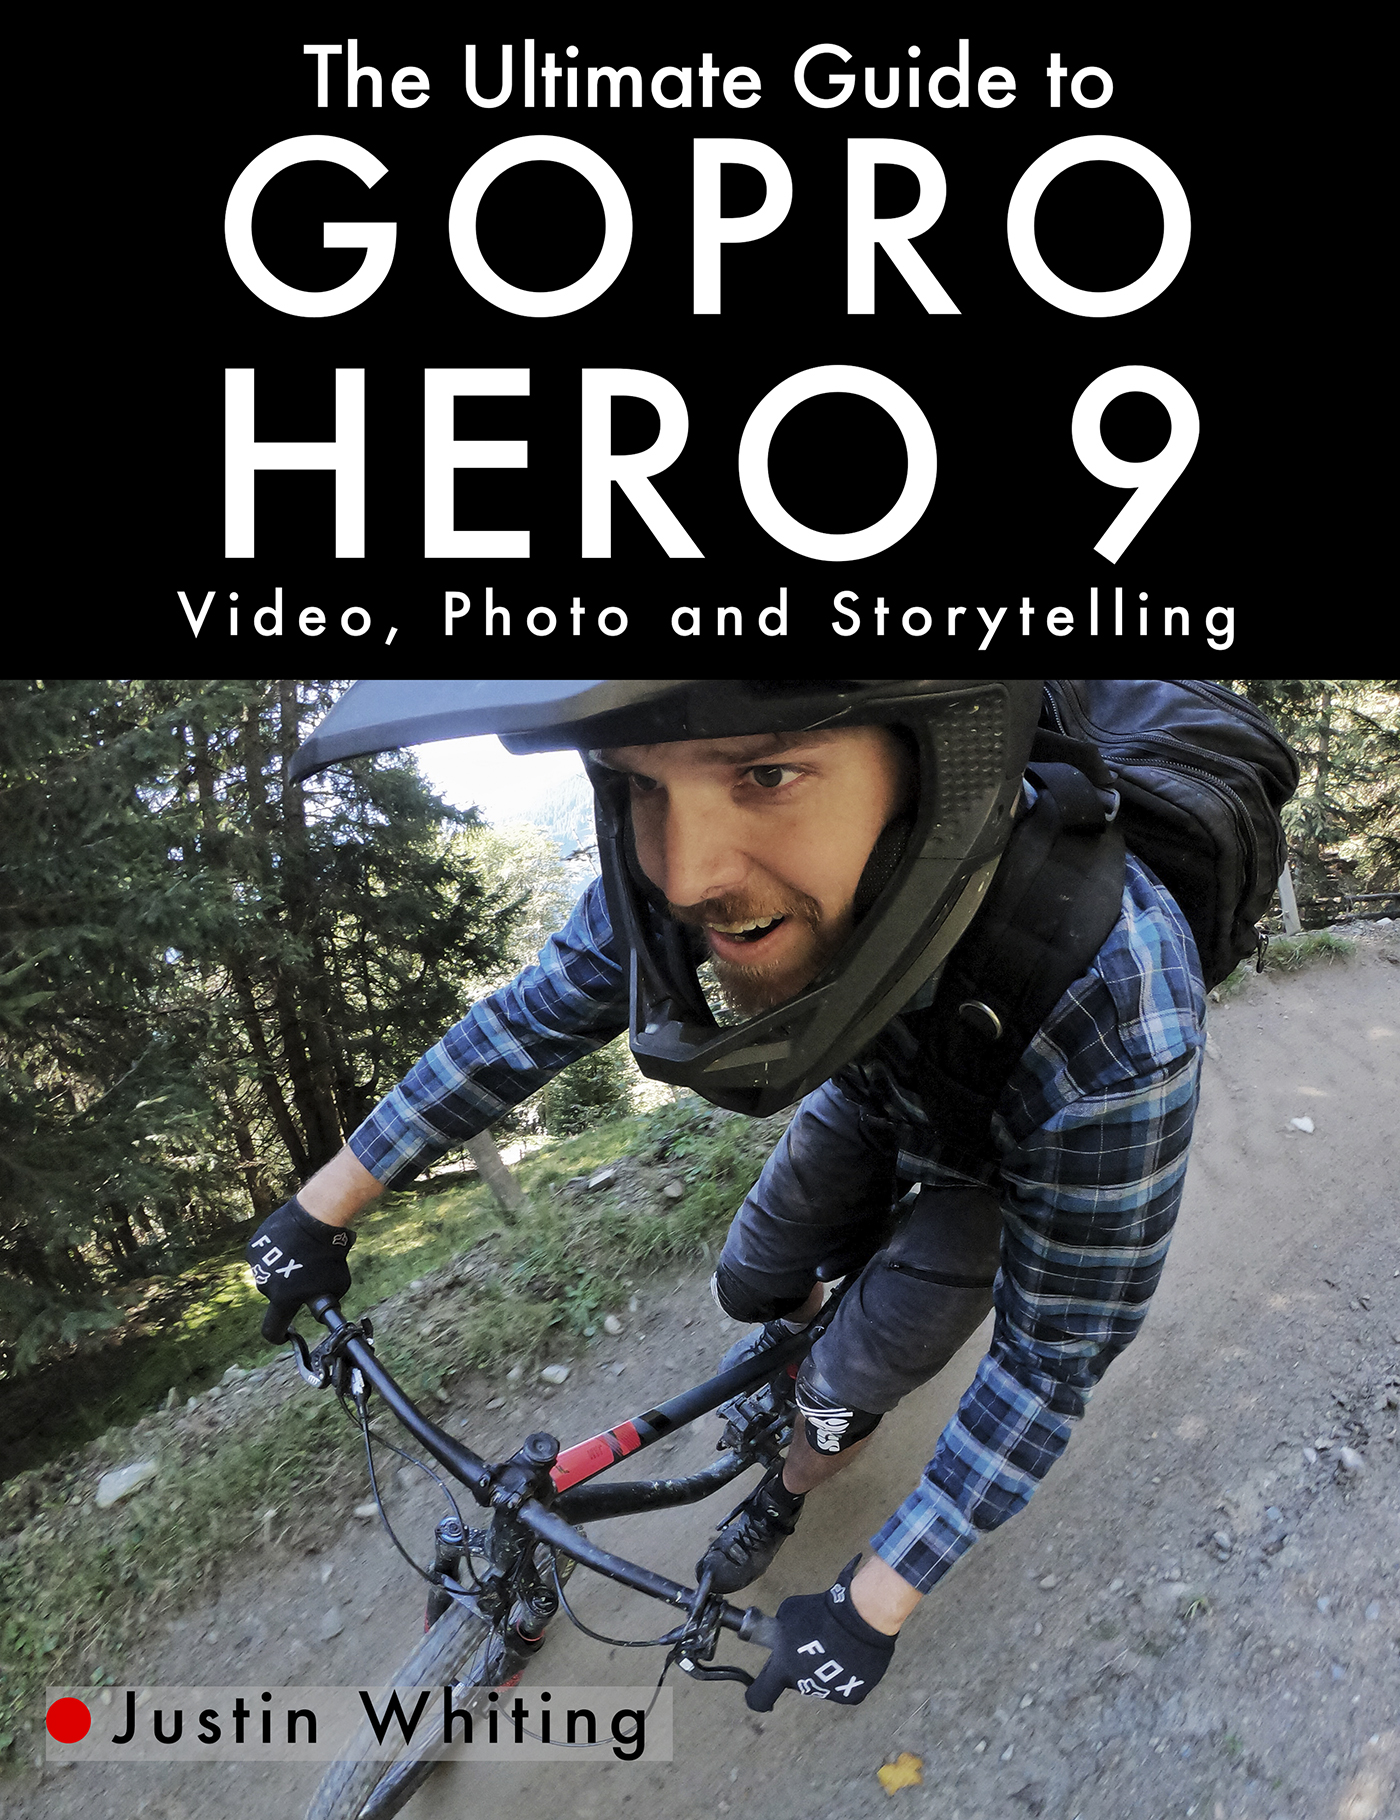 The Ultimate Guide To the GoPro Hero 9